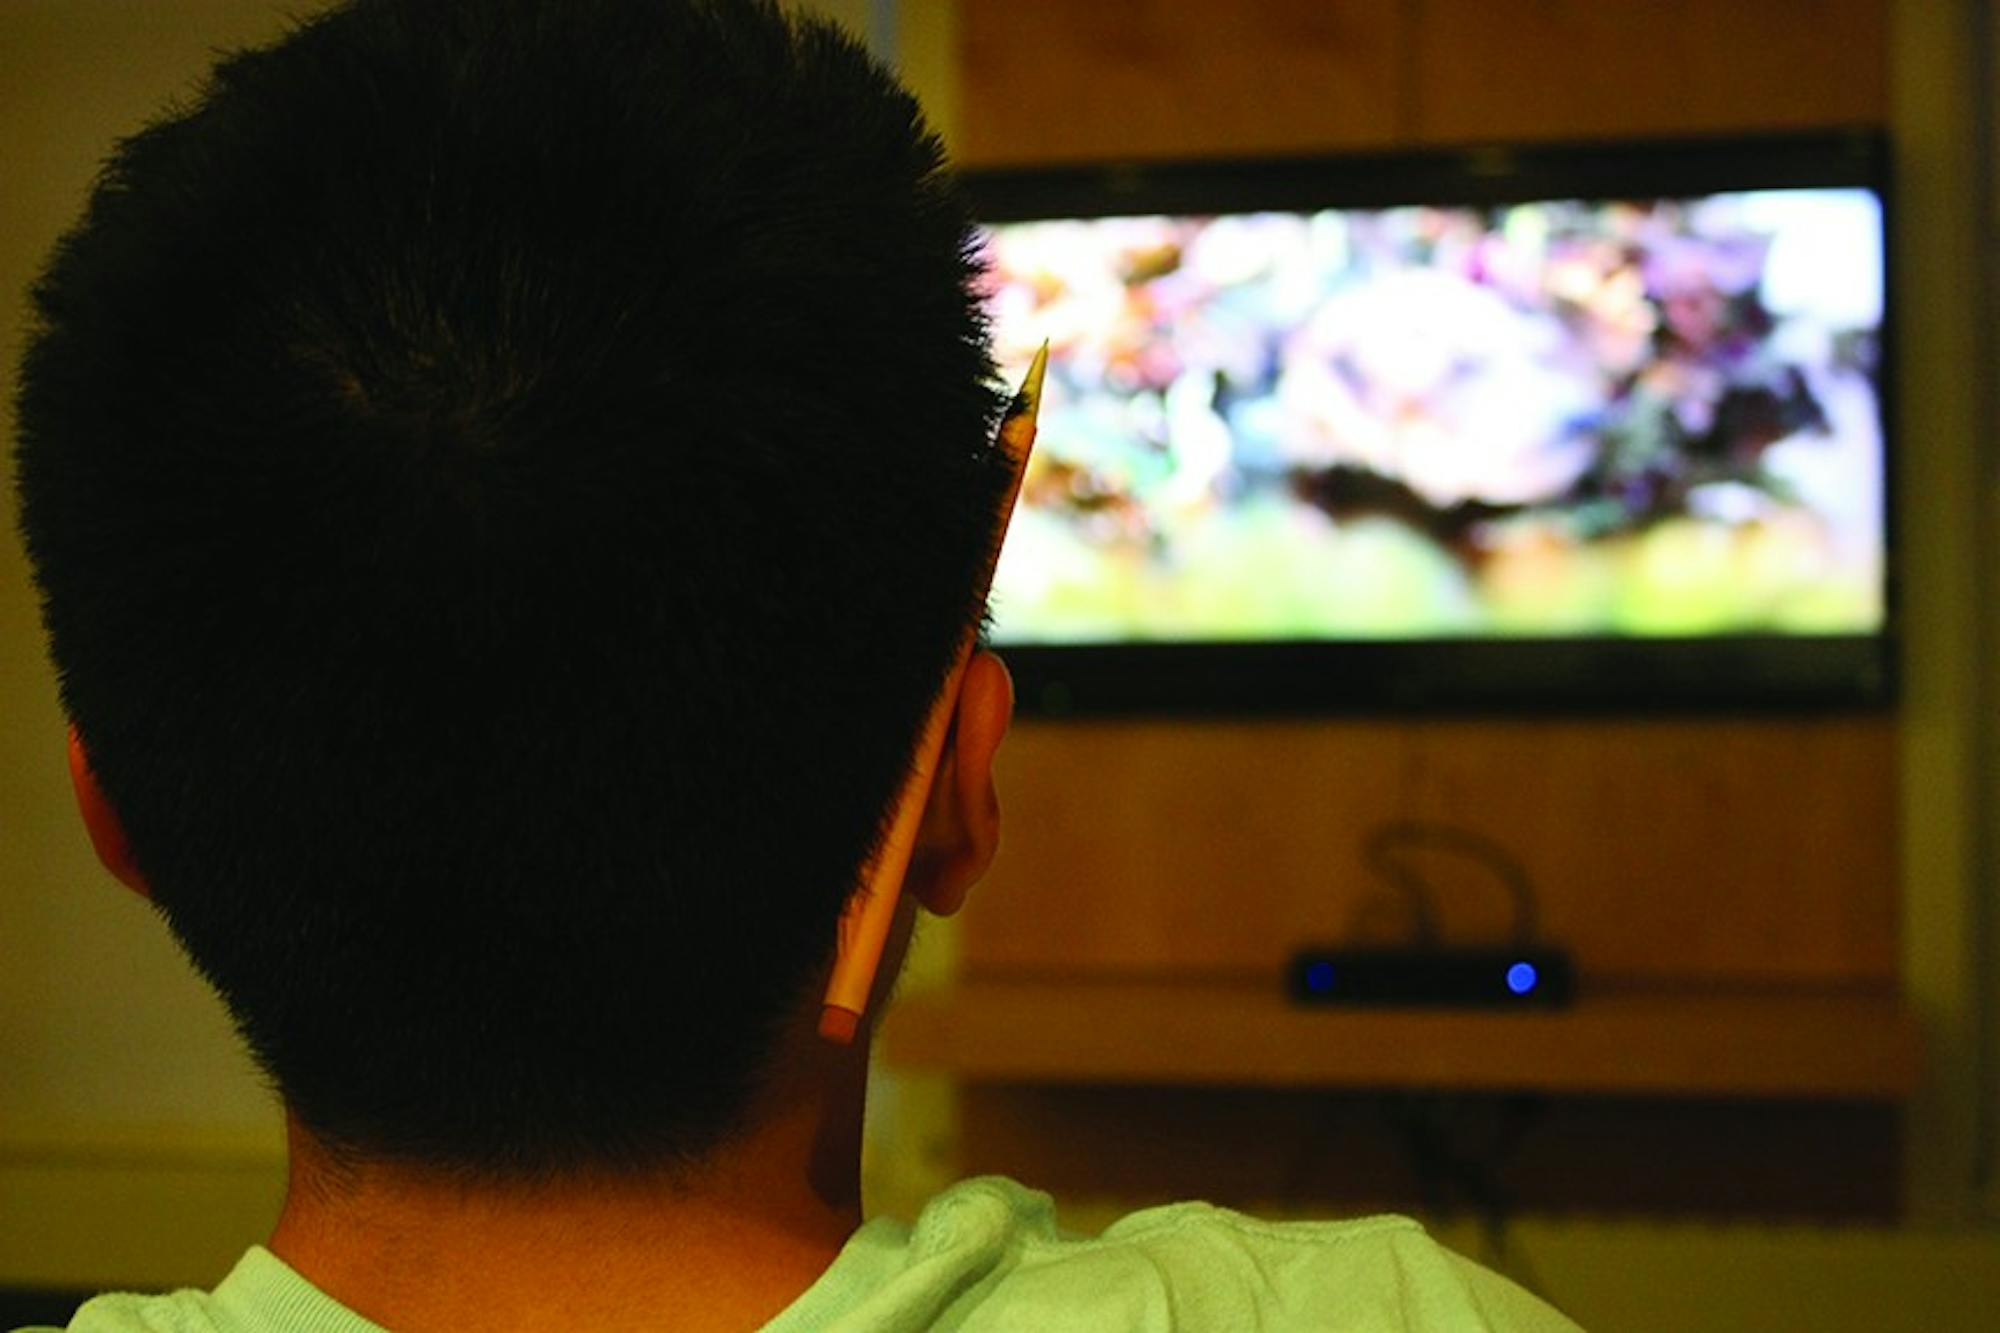 A student takes in a television show at the Collis Center.